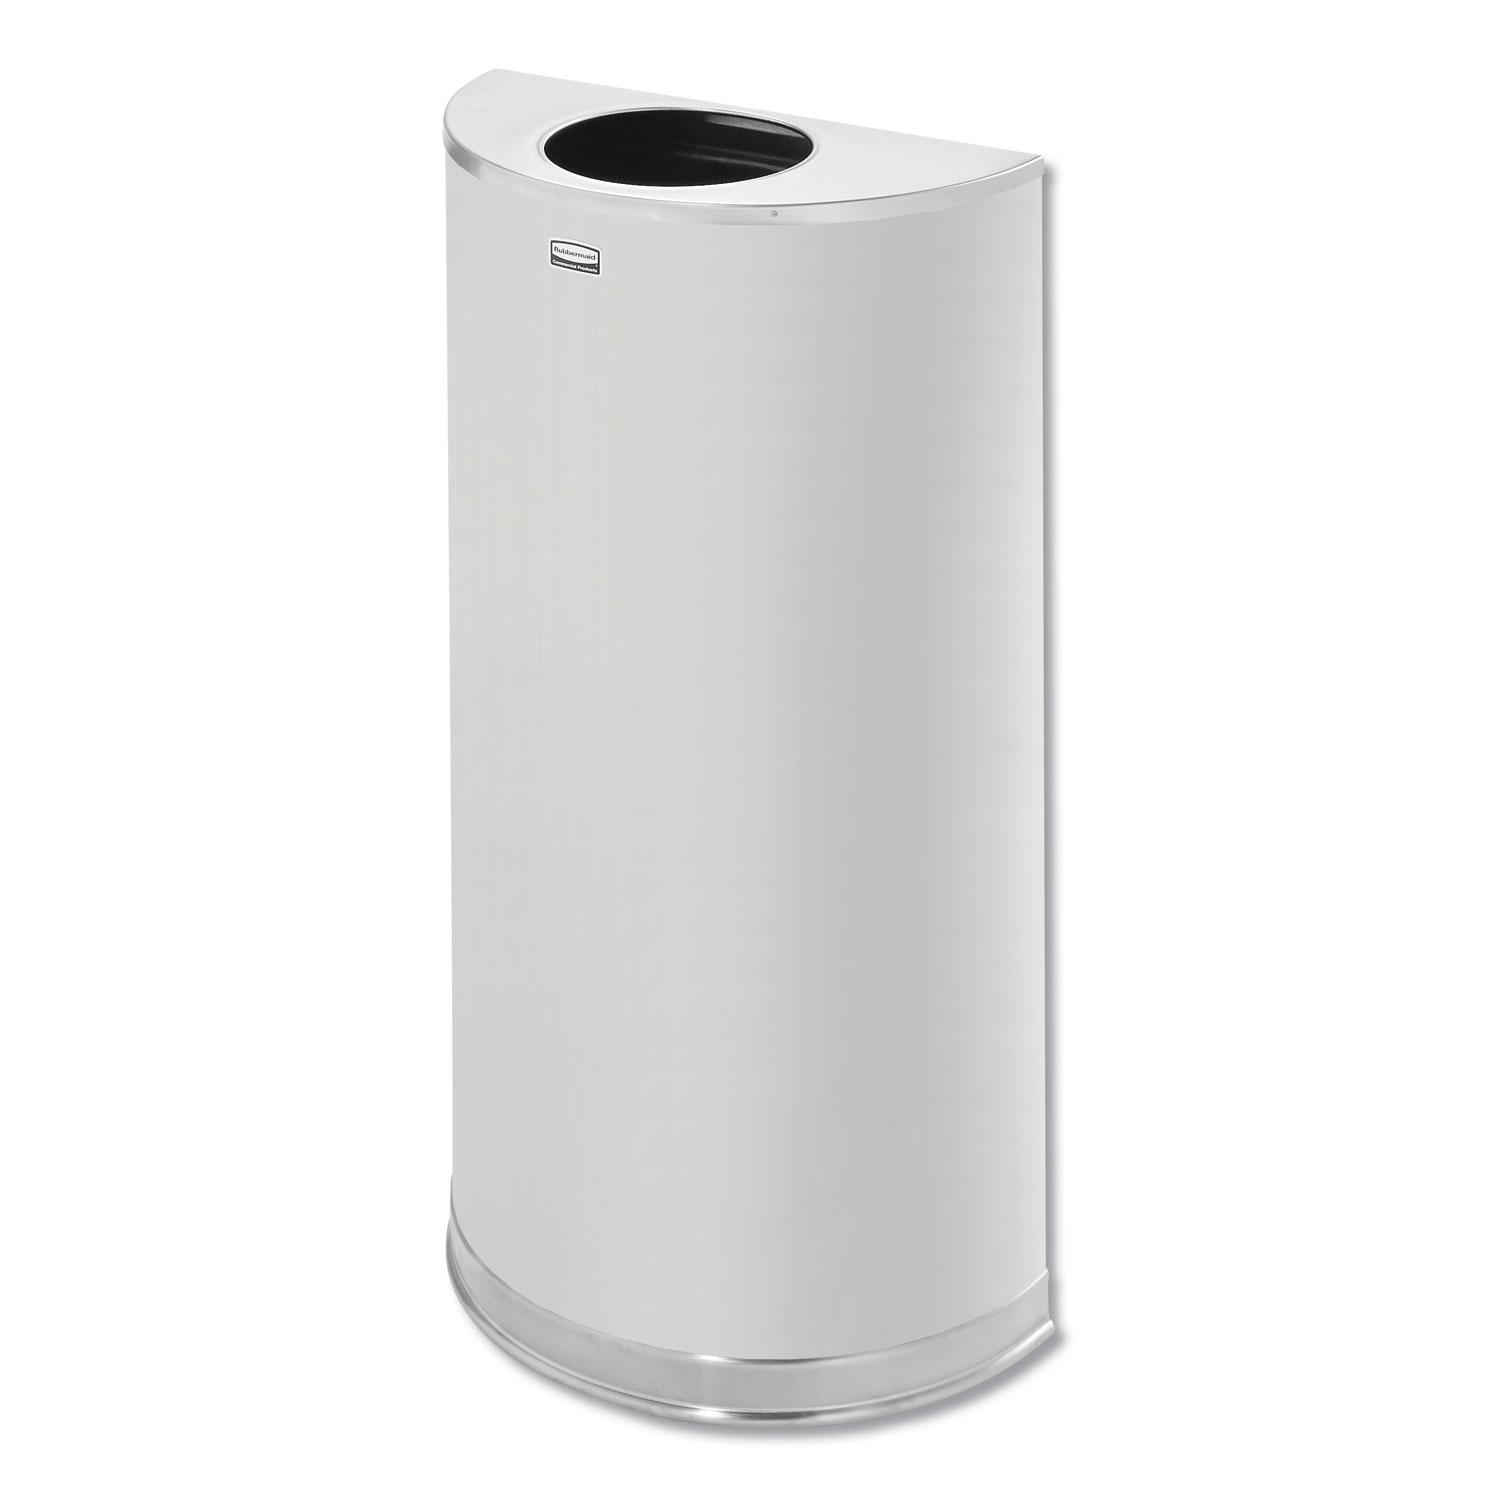  Rubbermaid Commercial FGSO12SSSPL European and Metallic Open Top Receptacle, Half-Round, 12 gal, Satin Stainless (RCPSO12SSS) 